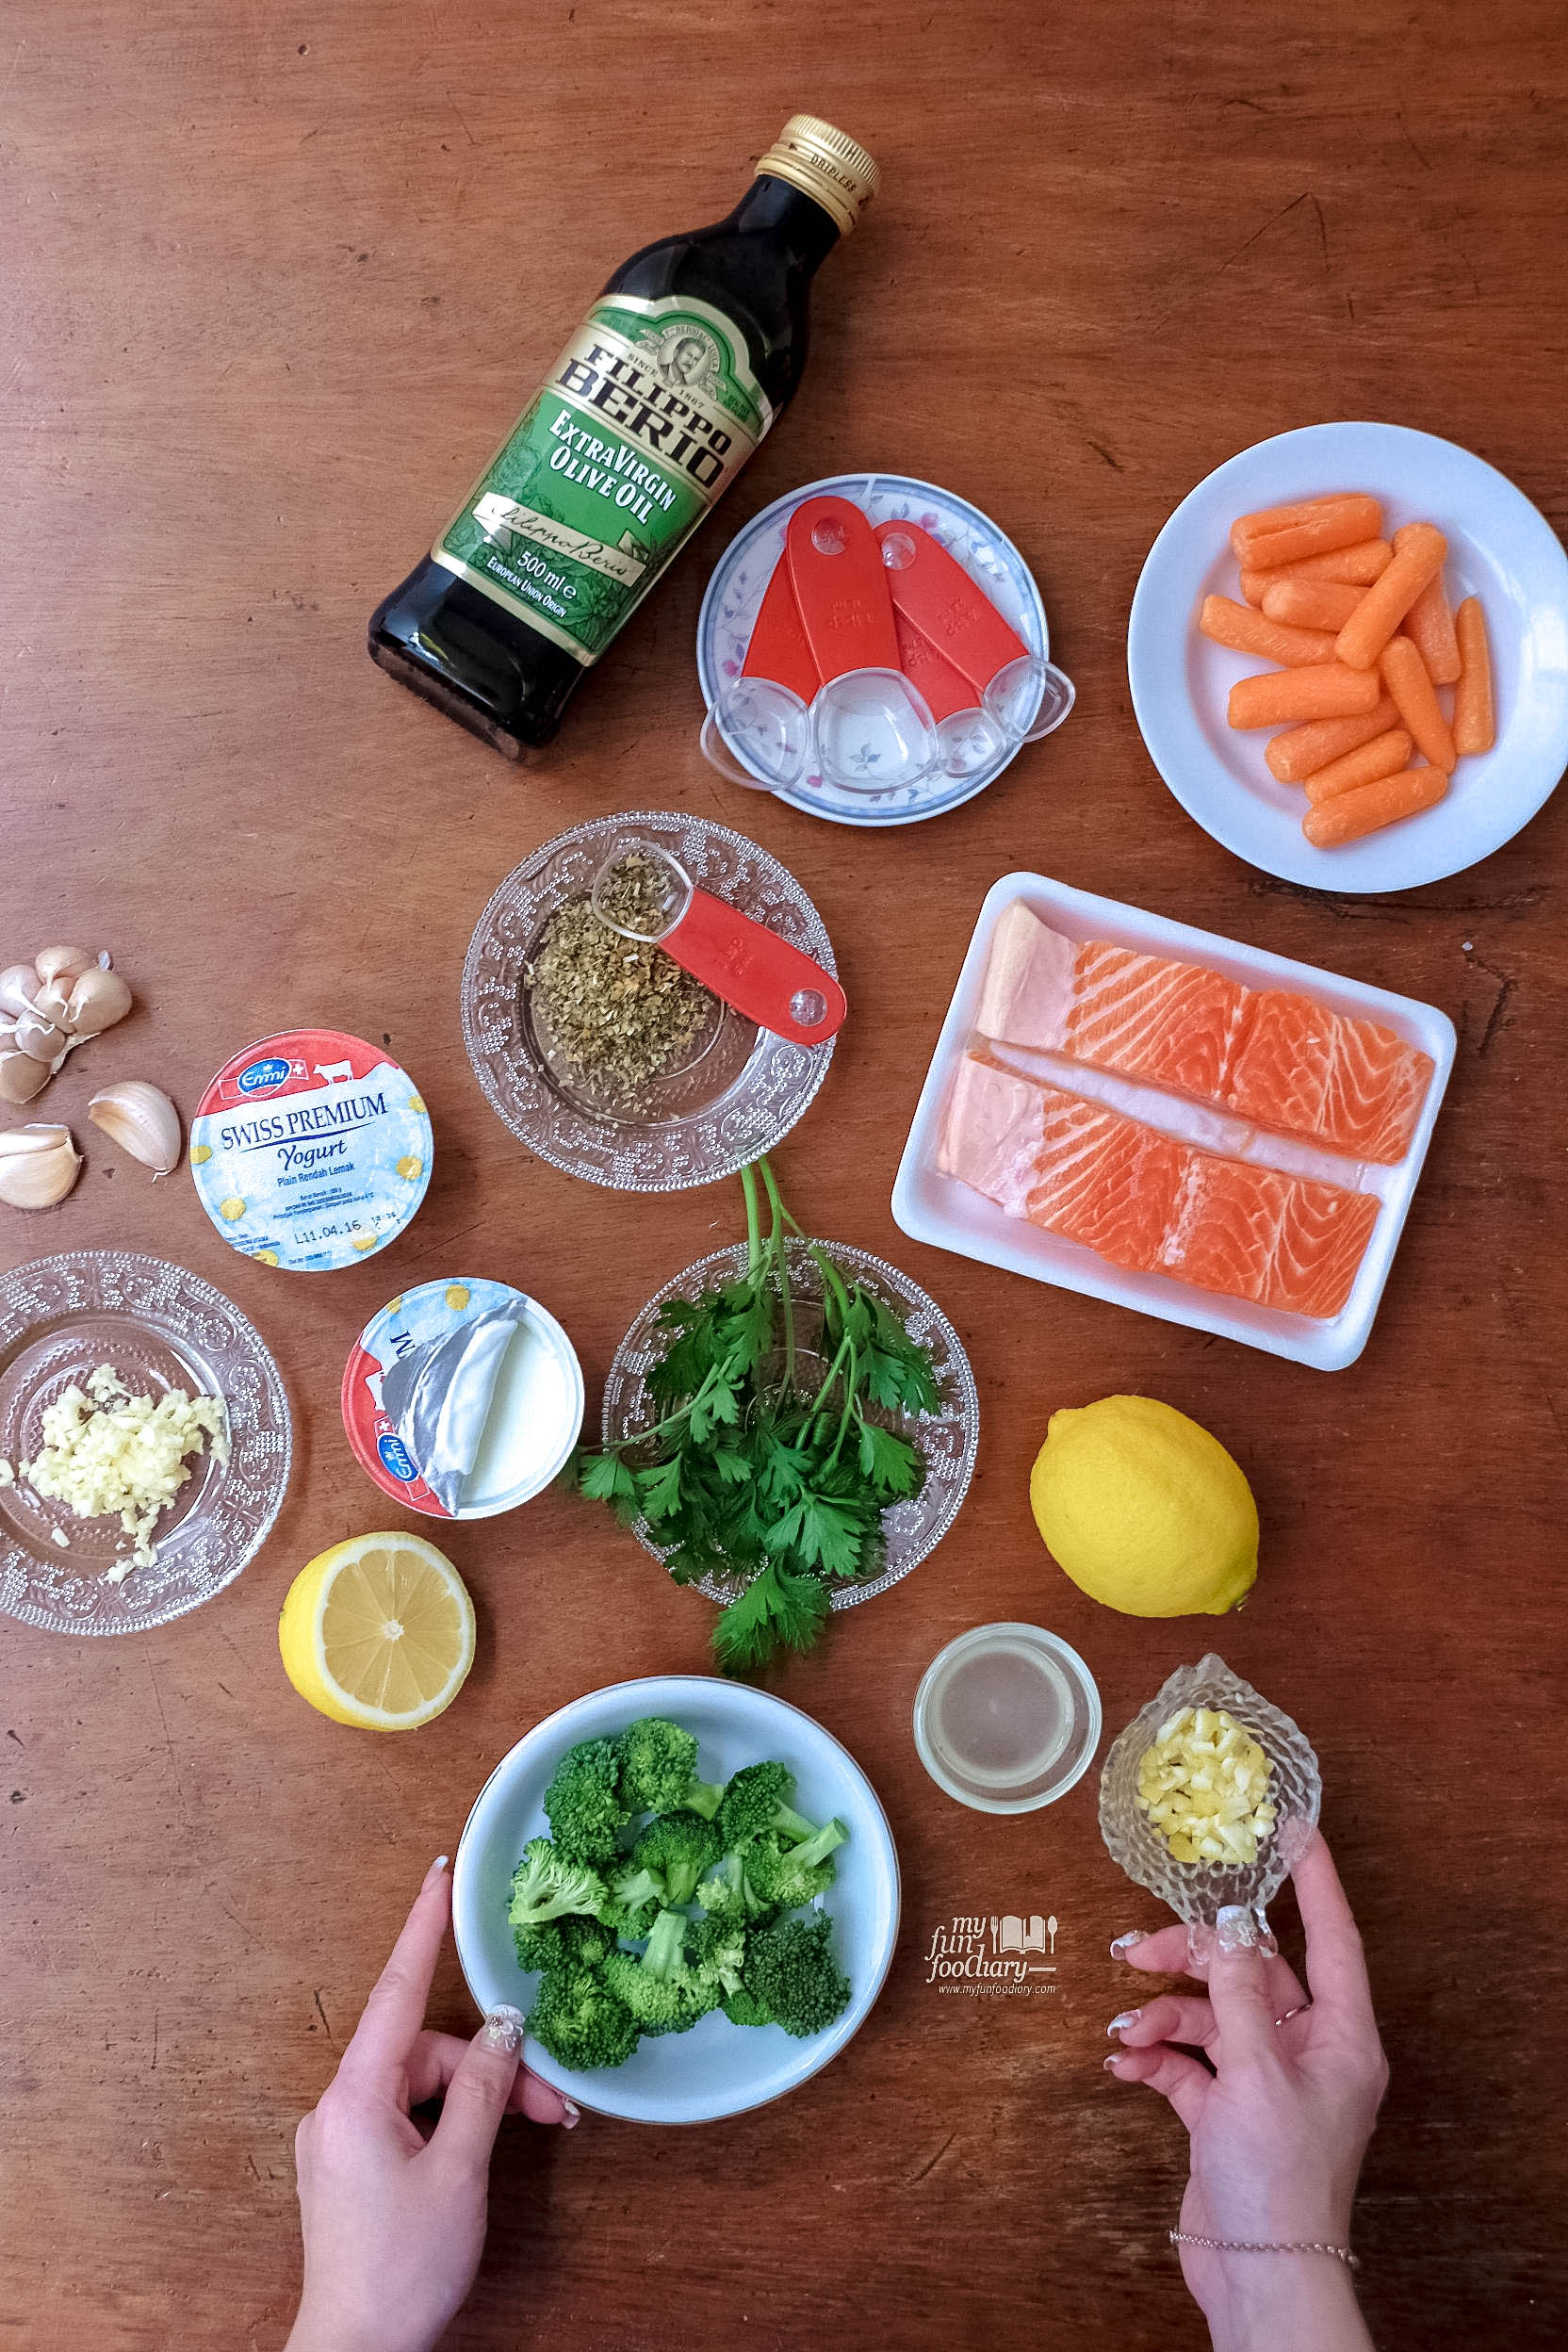 All the ingredients for this Salmon recipe by Myfunfoodiary